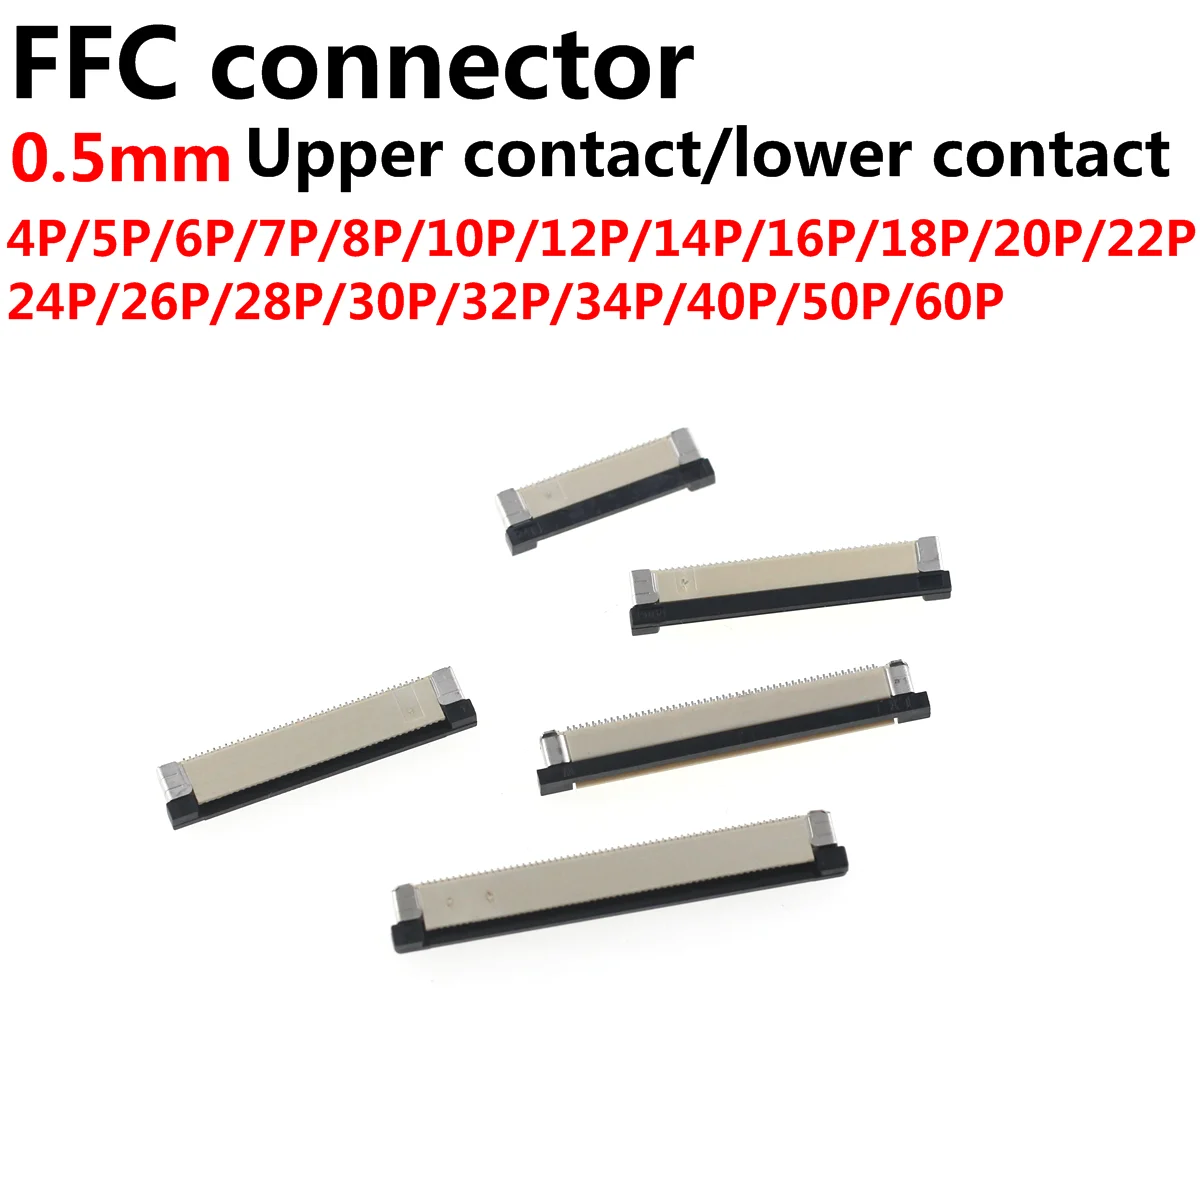 20Pcs 0.5mm FPC FFC 4P 6P 8P 10P 12P 14P 16P 18P 20P 24P 26P 30P 32P 34P 40P 50Pin Flat Cable Socket Connector